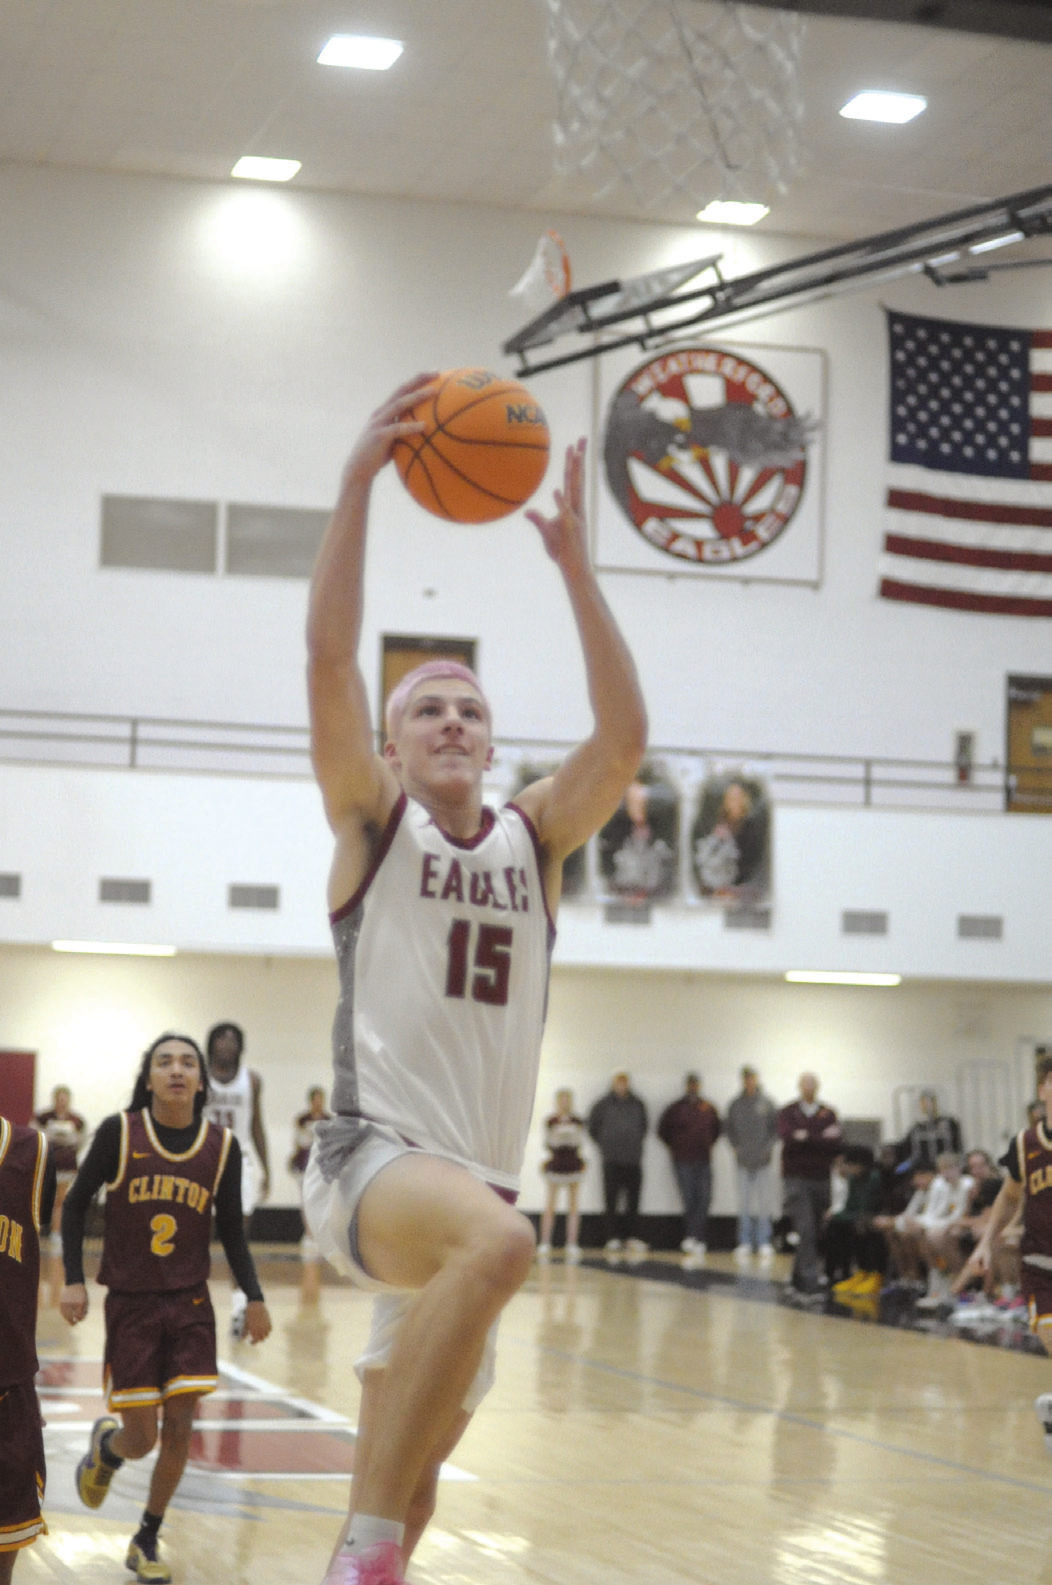 Nate Reherman goes up for a dunk during Tueday’s game against Clinton. He scored 26 points, which was more than Clinton did in the entire game. Josh Burton/WDN